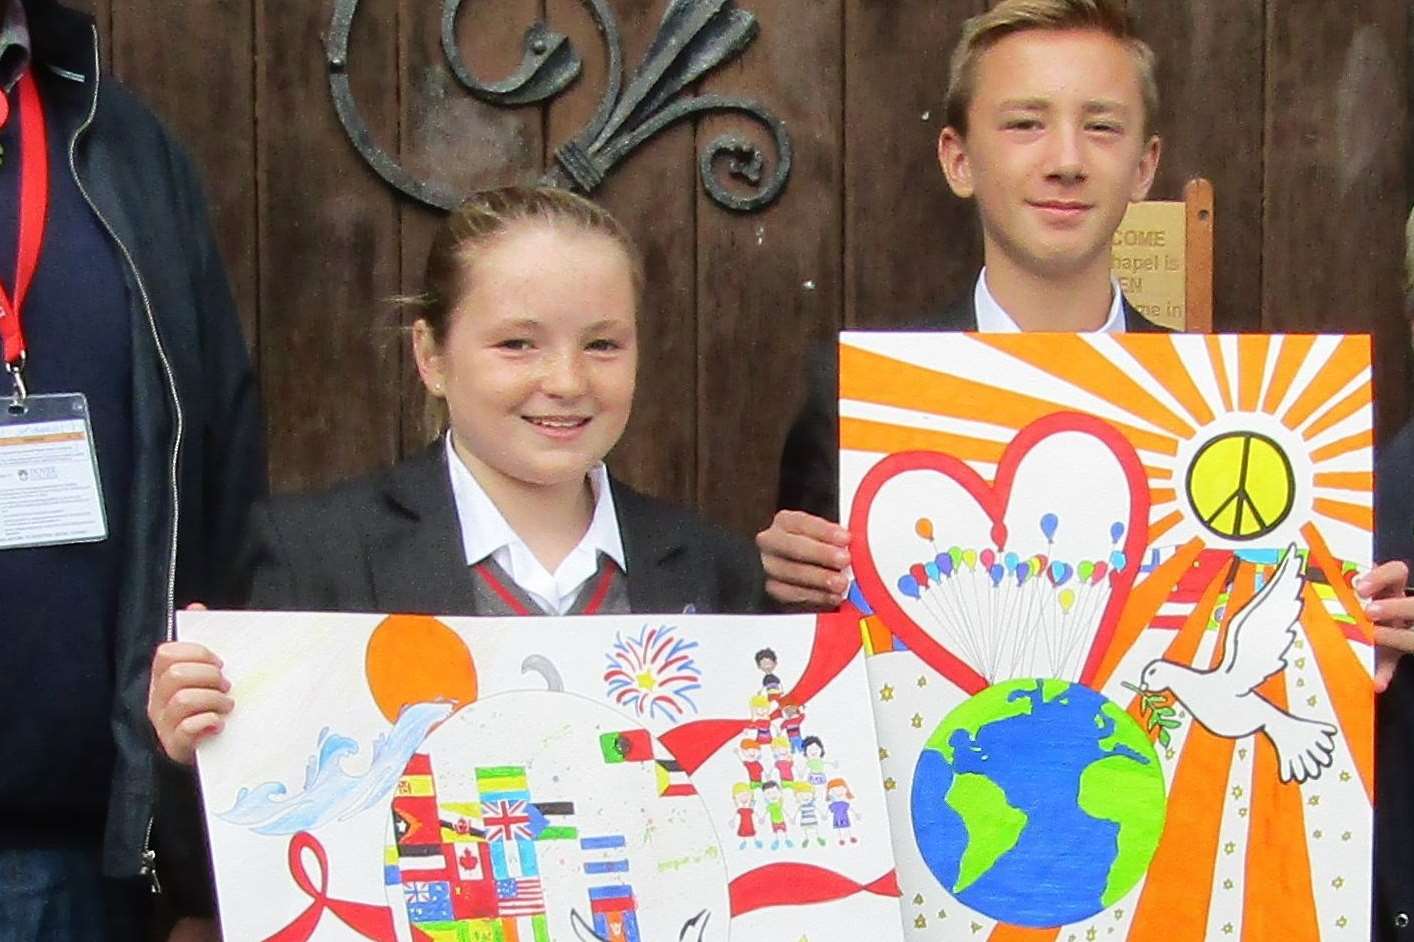 Charlotte Hide and Thomas Baker with their peace posters.